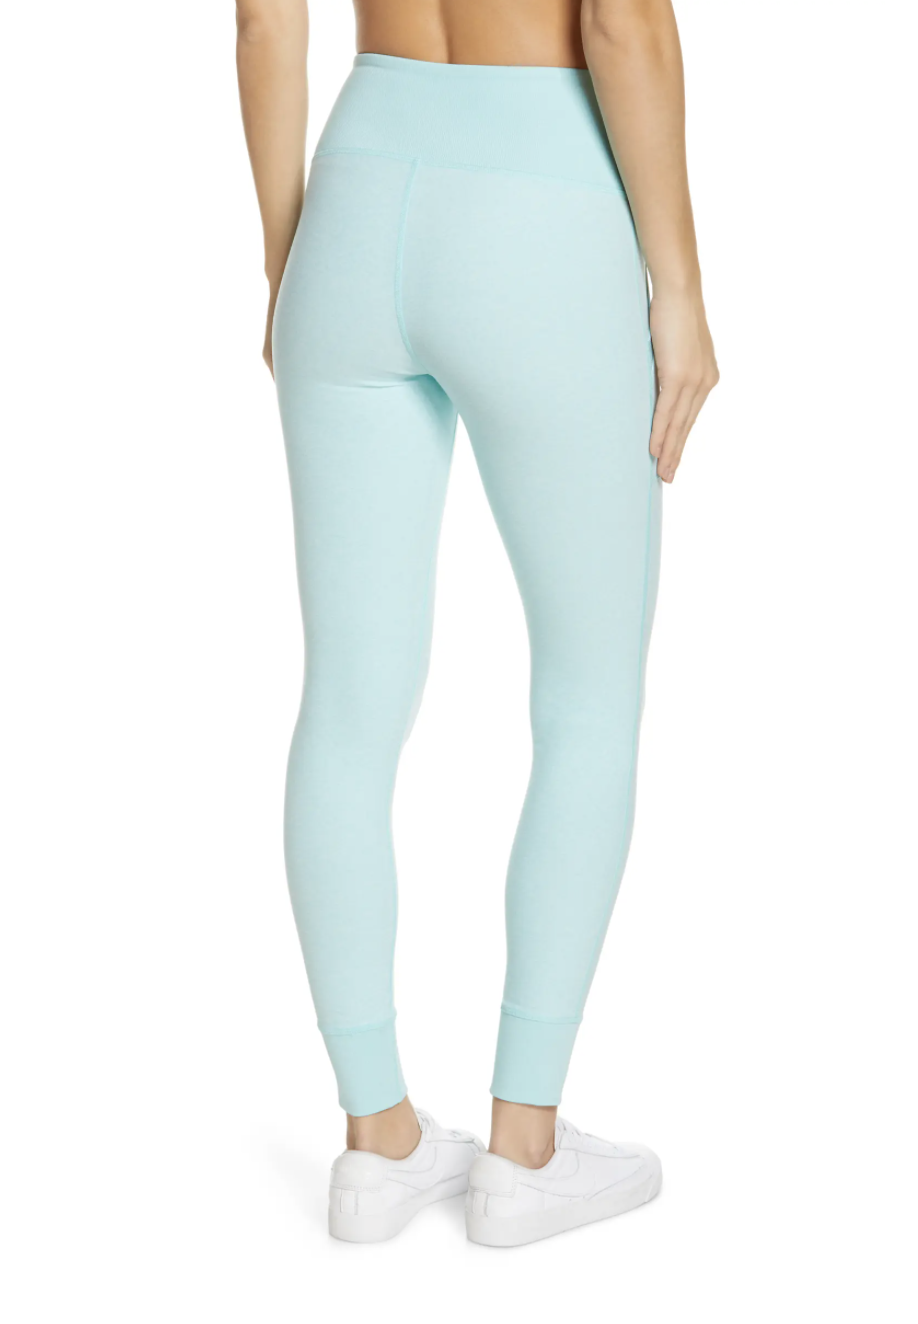 Zella Leggings With Pockets Are Up to 25% Off Right Now